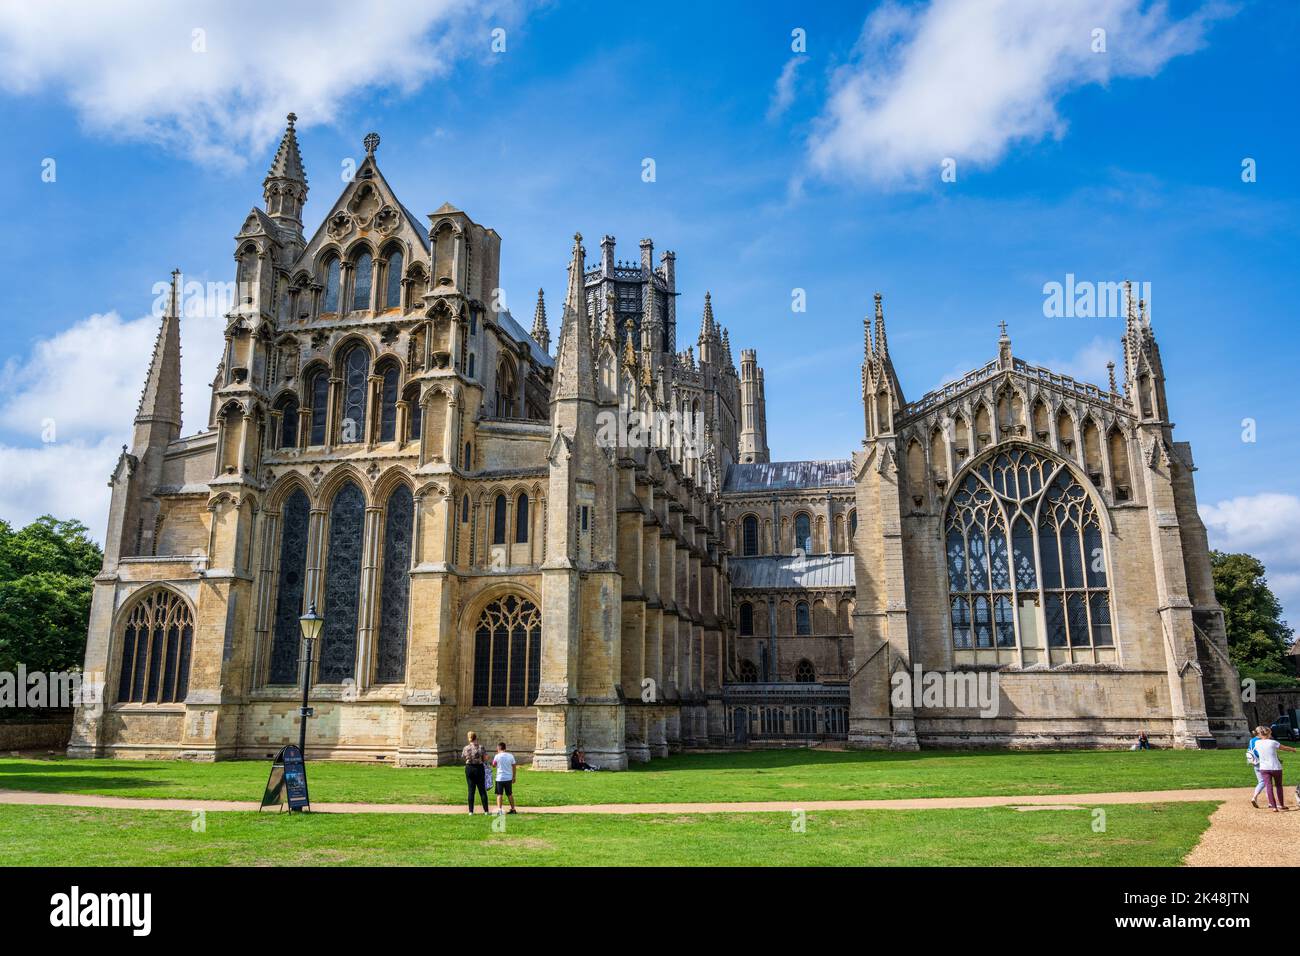 East elevation of Ely Cathedral, with the Lady Chapel on the right, Ely, Cambridgeshire, England, UK Stock Photo